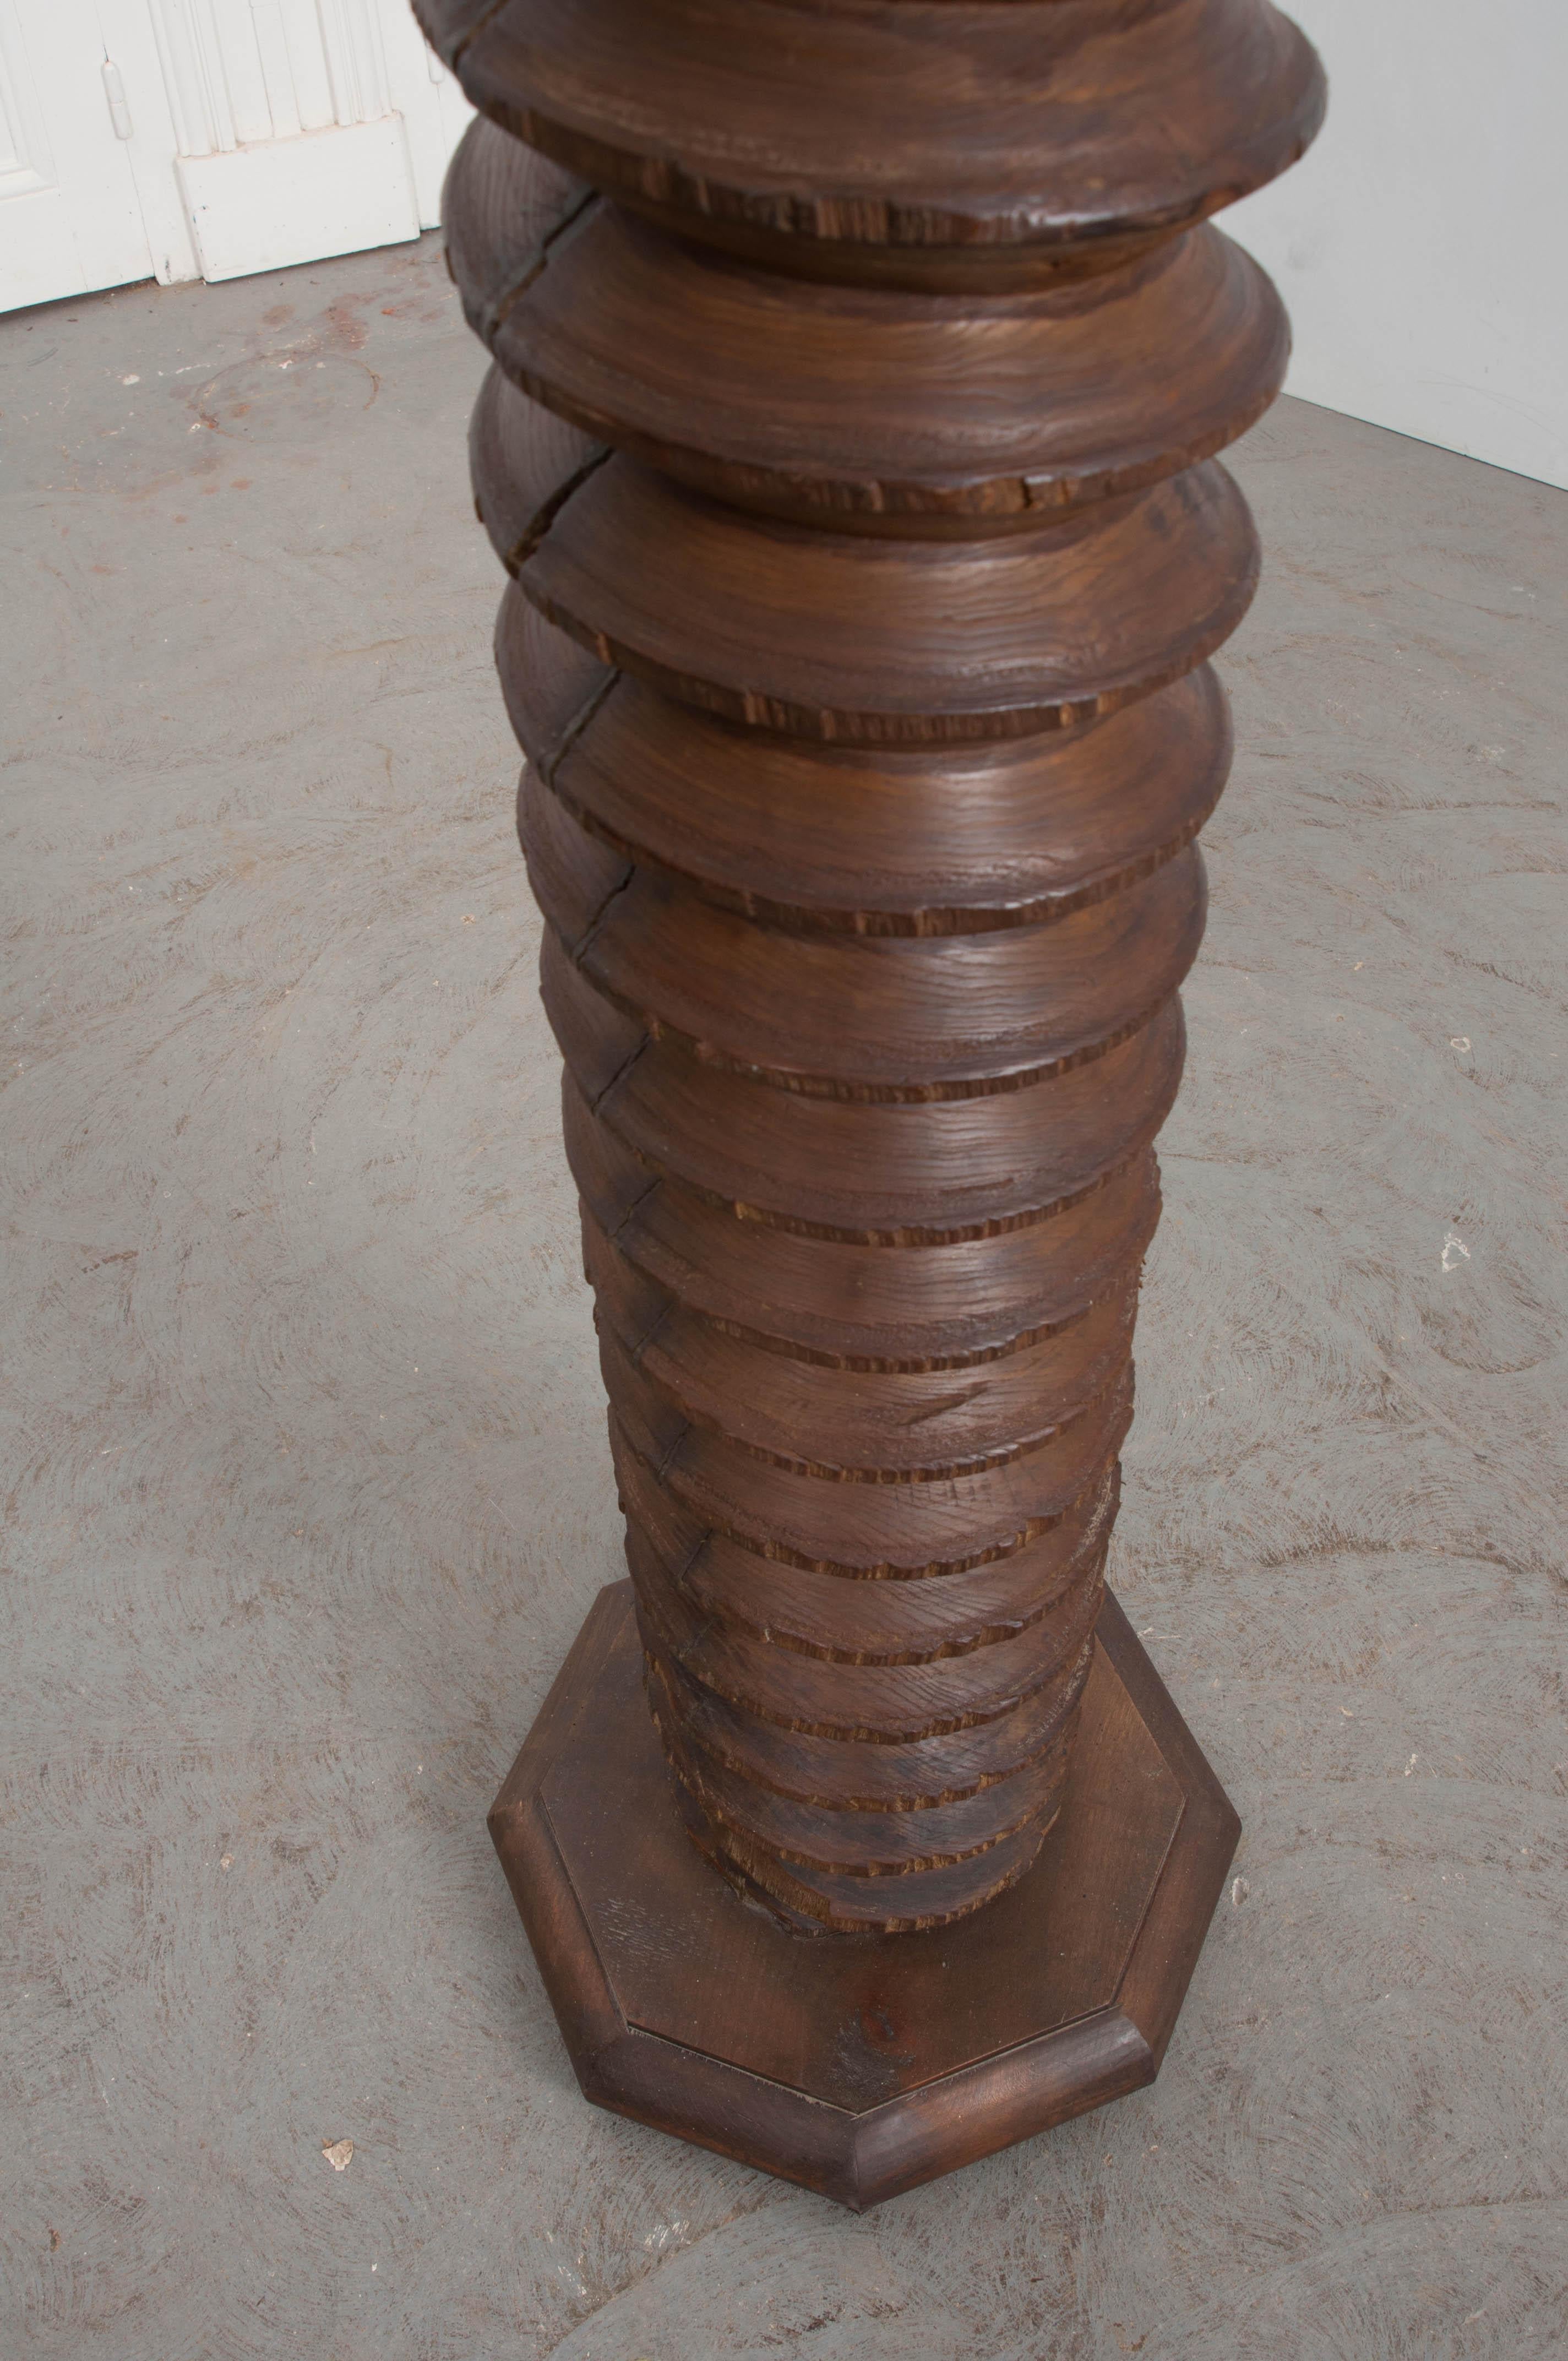 This wonderfully-aged 19th century wine press screw, from a vineyard in France, has been converted into a pedestal with a later octagonal top and base. This antique press screw, with a deep, rich staining and patina from the grapes could also be